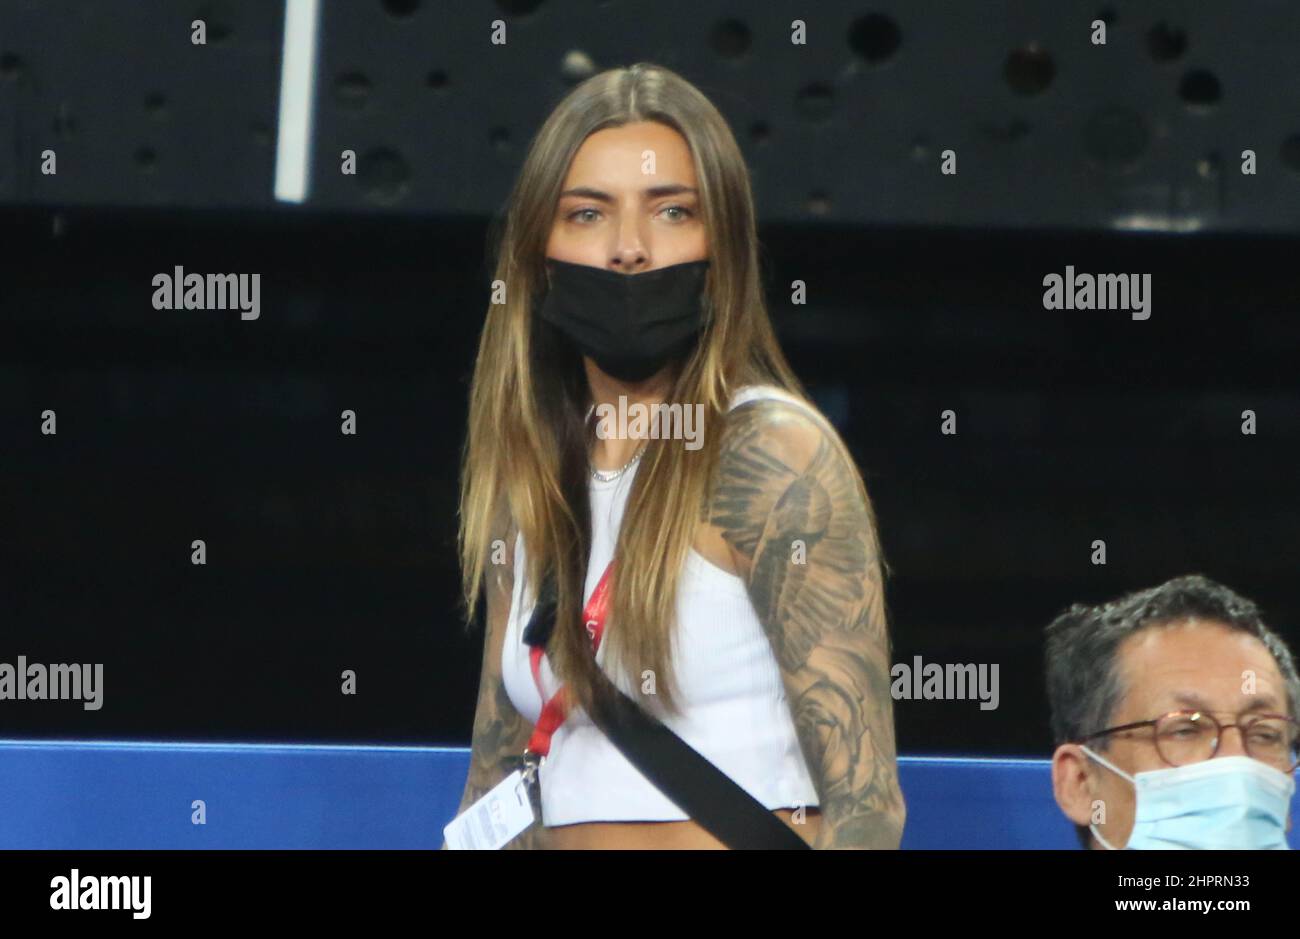 Sophia Thomalla, girlfriend of Alexander Zverev of Germany during his match against Mikael Ymer of Sweden during the semi-finals at the Open Sud de France 2022, ATP 250 tennis tournament on February